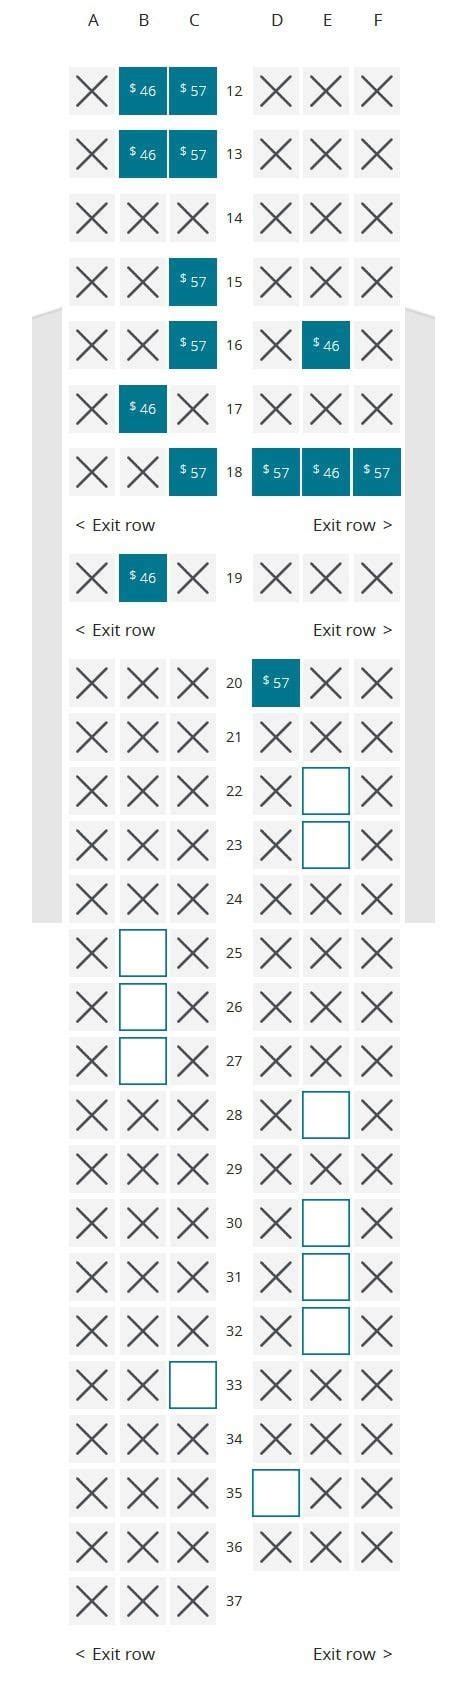 air canada seat selection